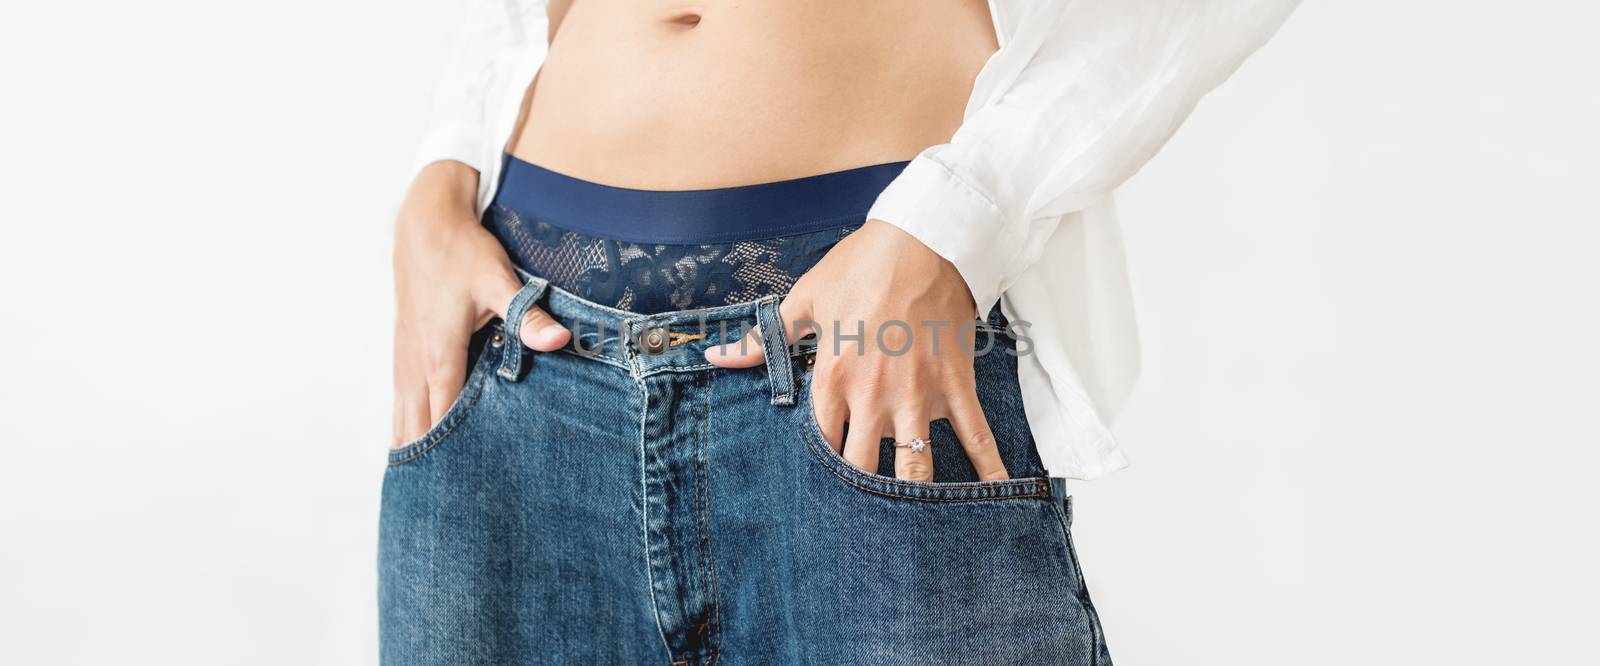 Woman hides her palm with engagement ring in pocket of classic blue jeans. Modern fashion - low rise boyfriend jeans and white shirt.